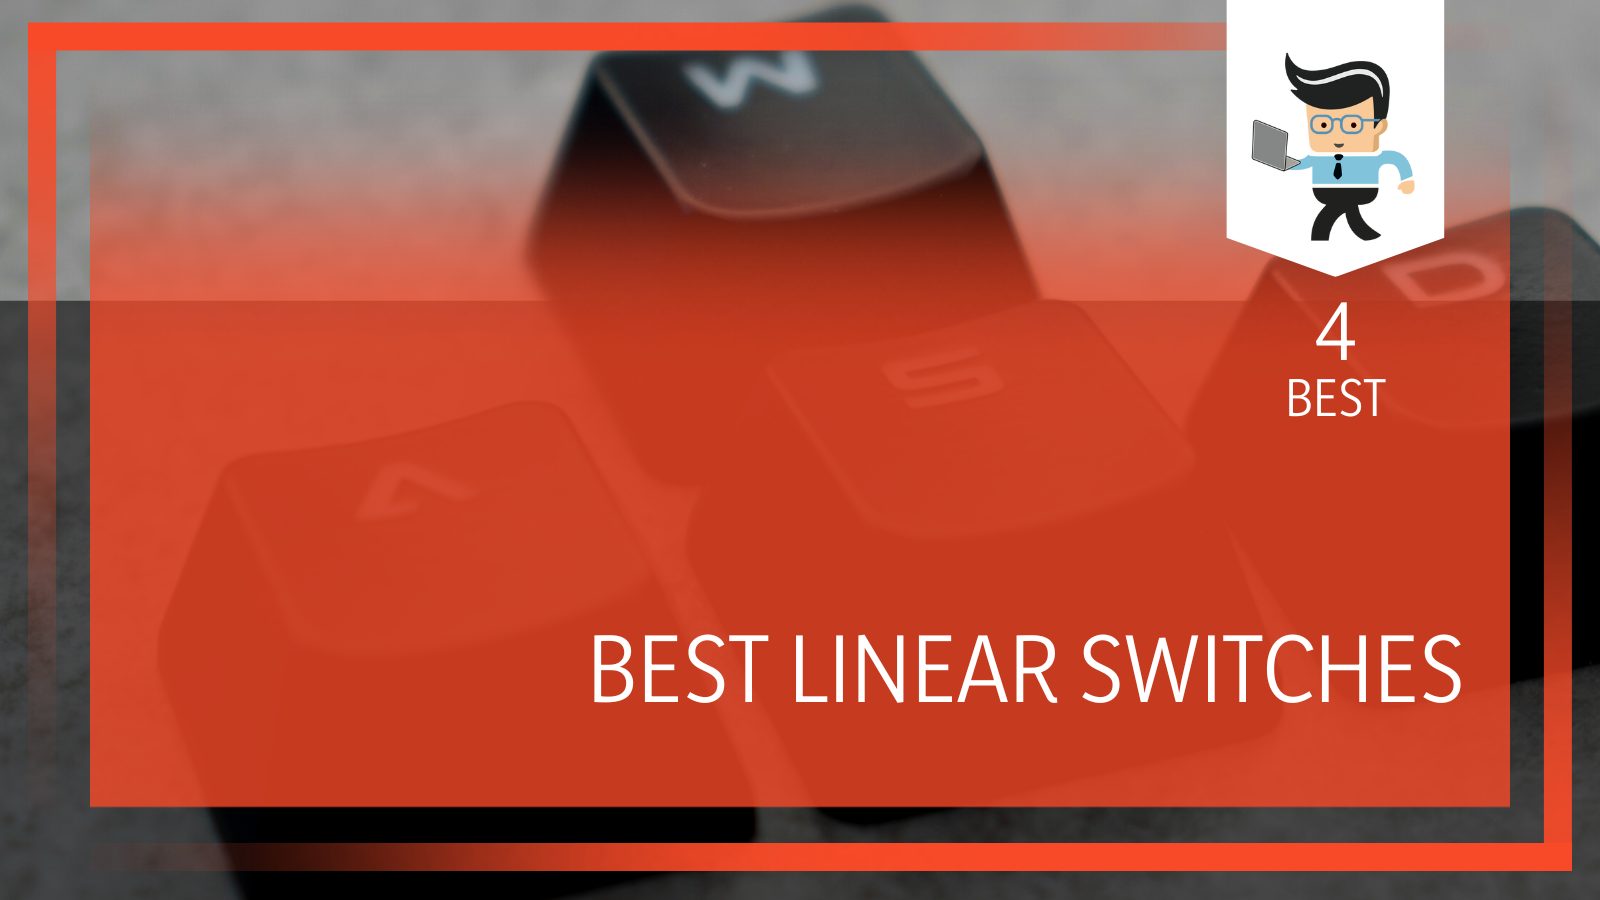 The Linear Switches